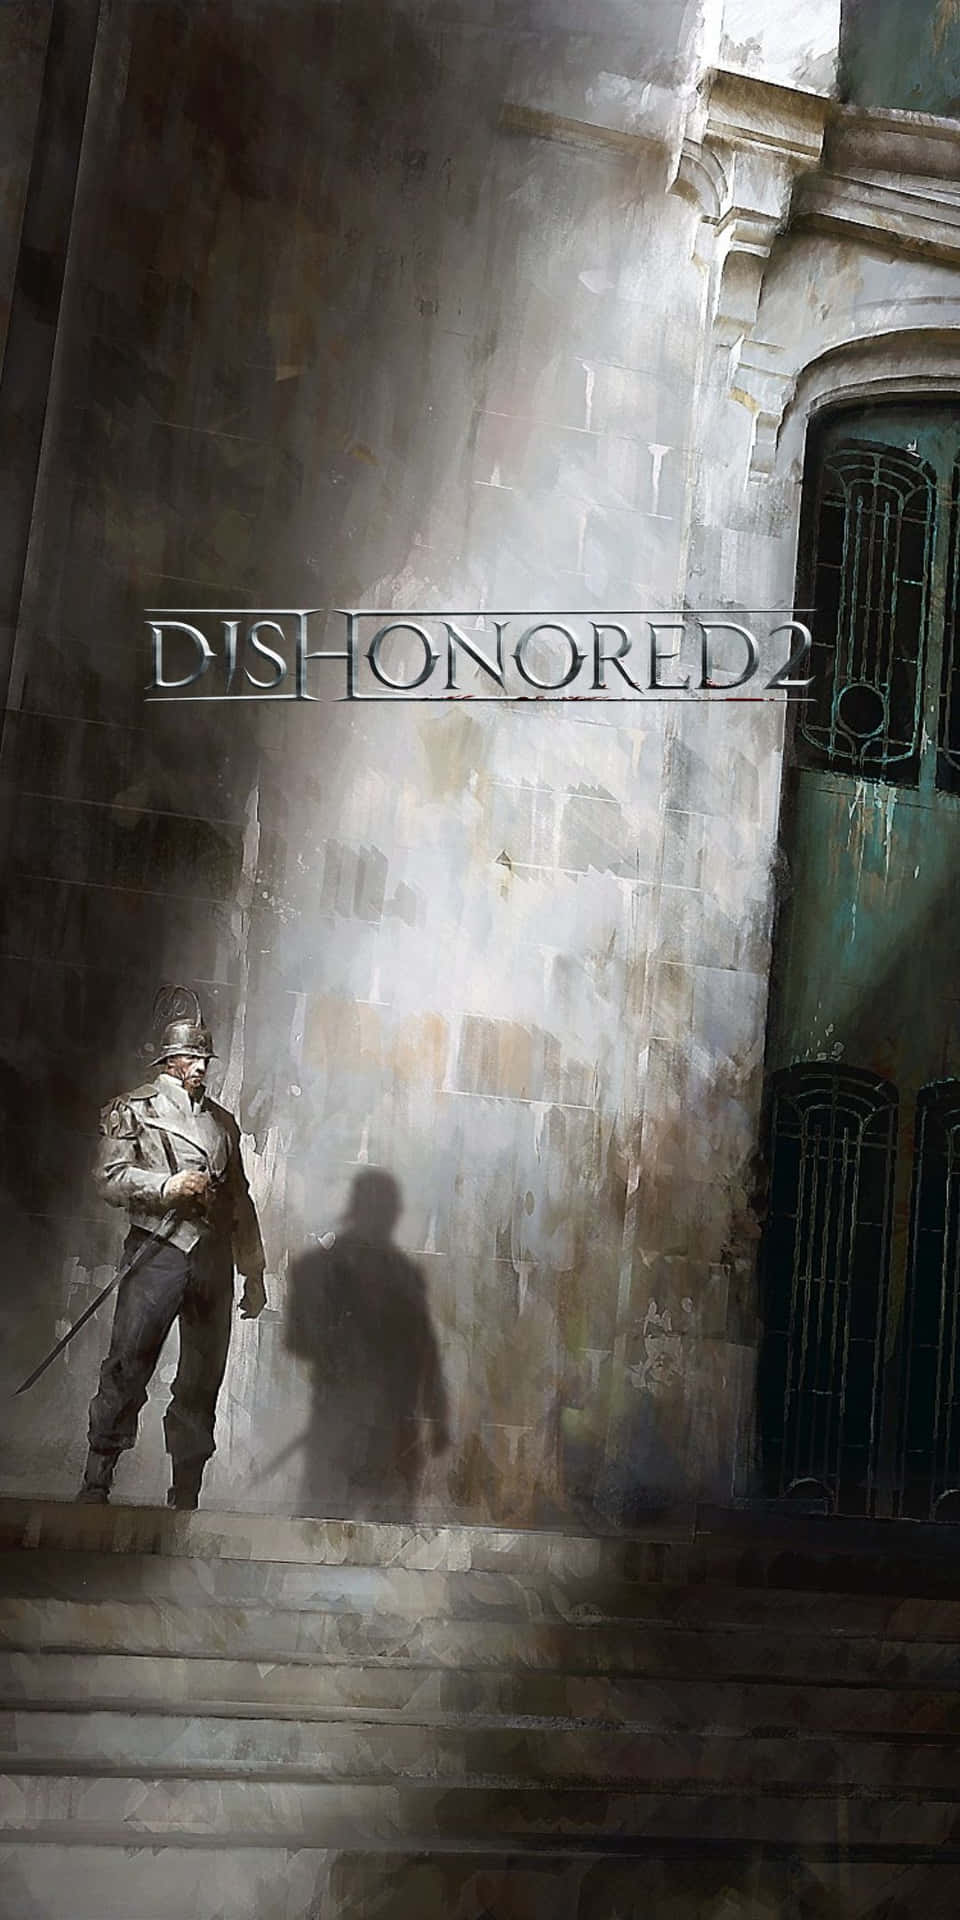 Dishonored2 - Pc - Pc - Pc - Pc - Pc -